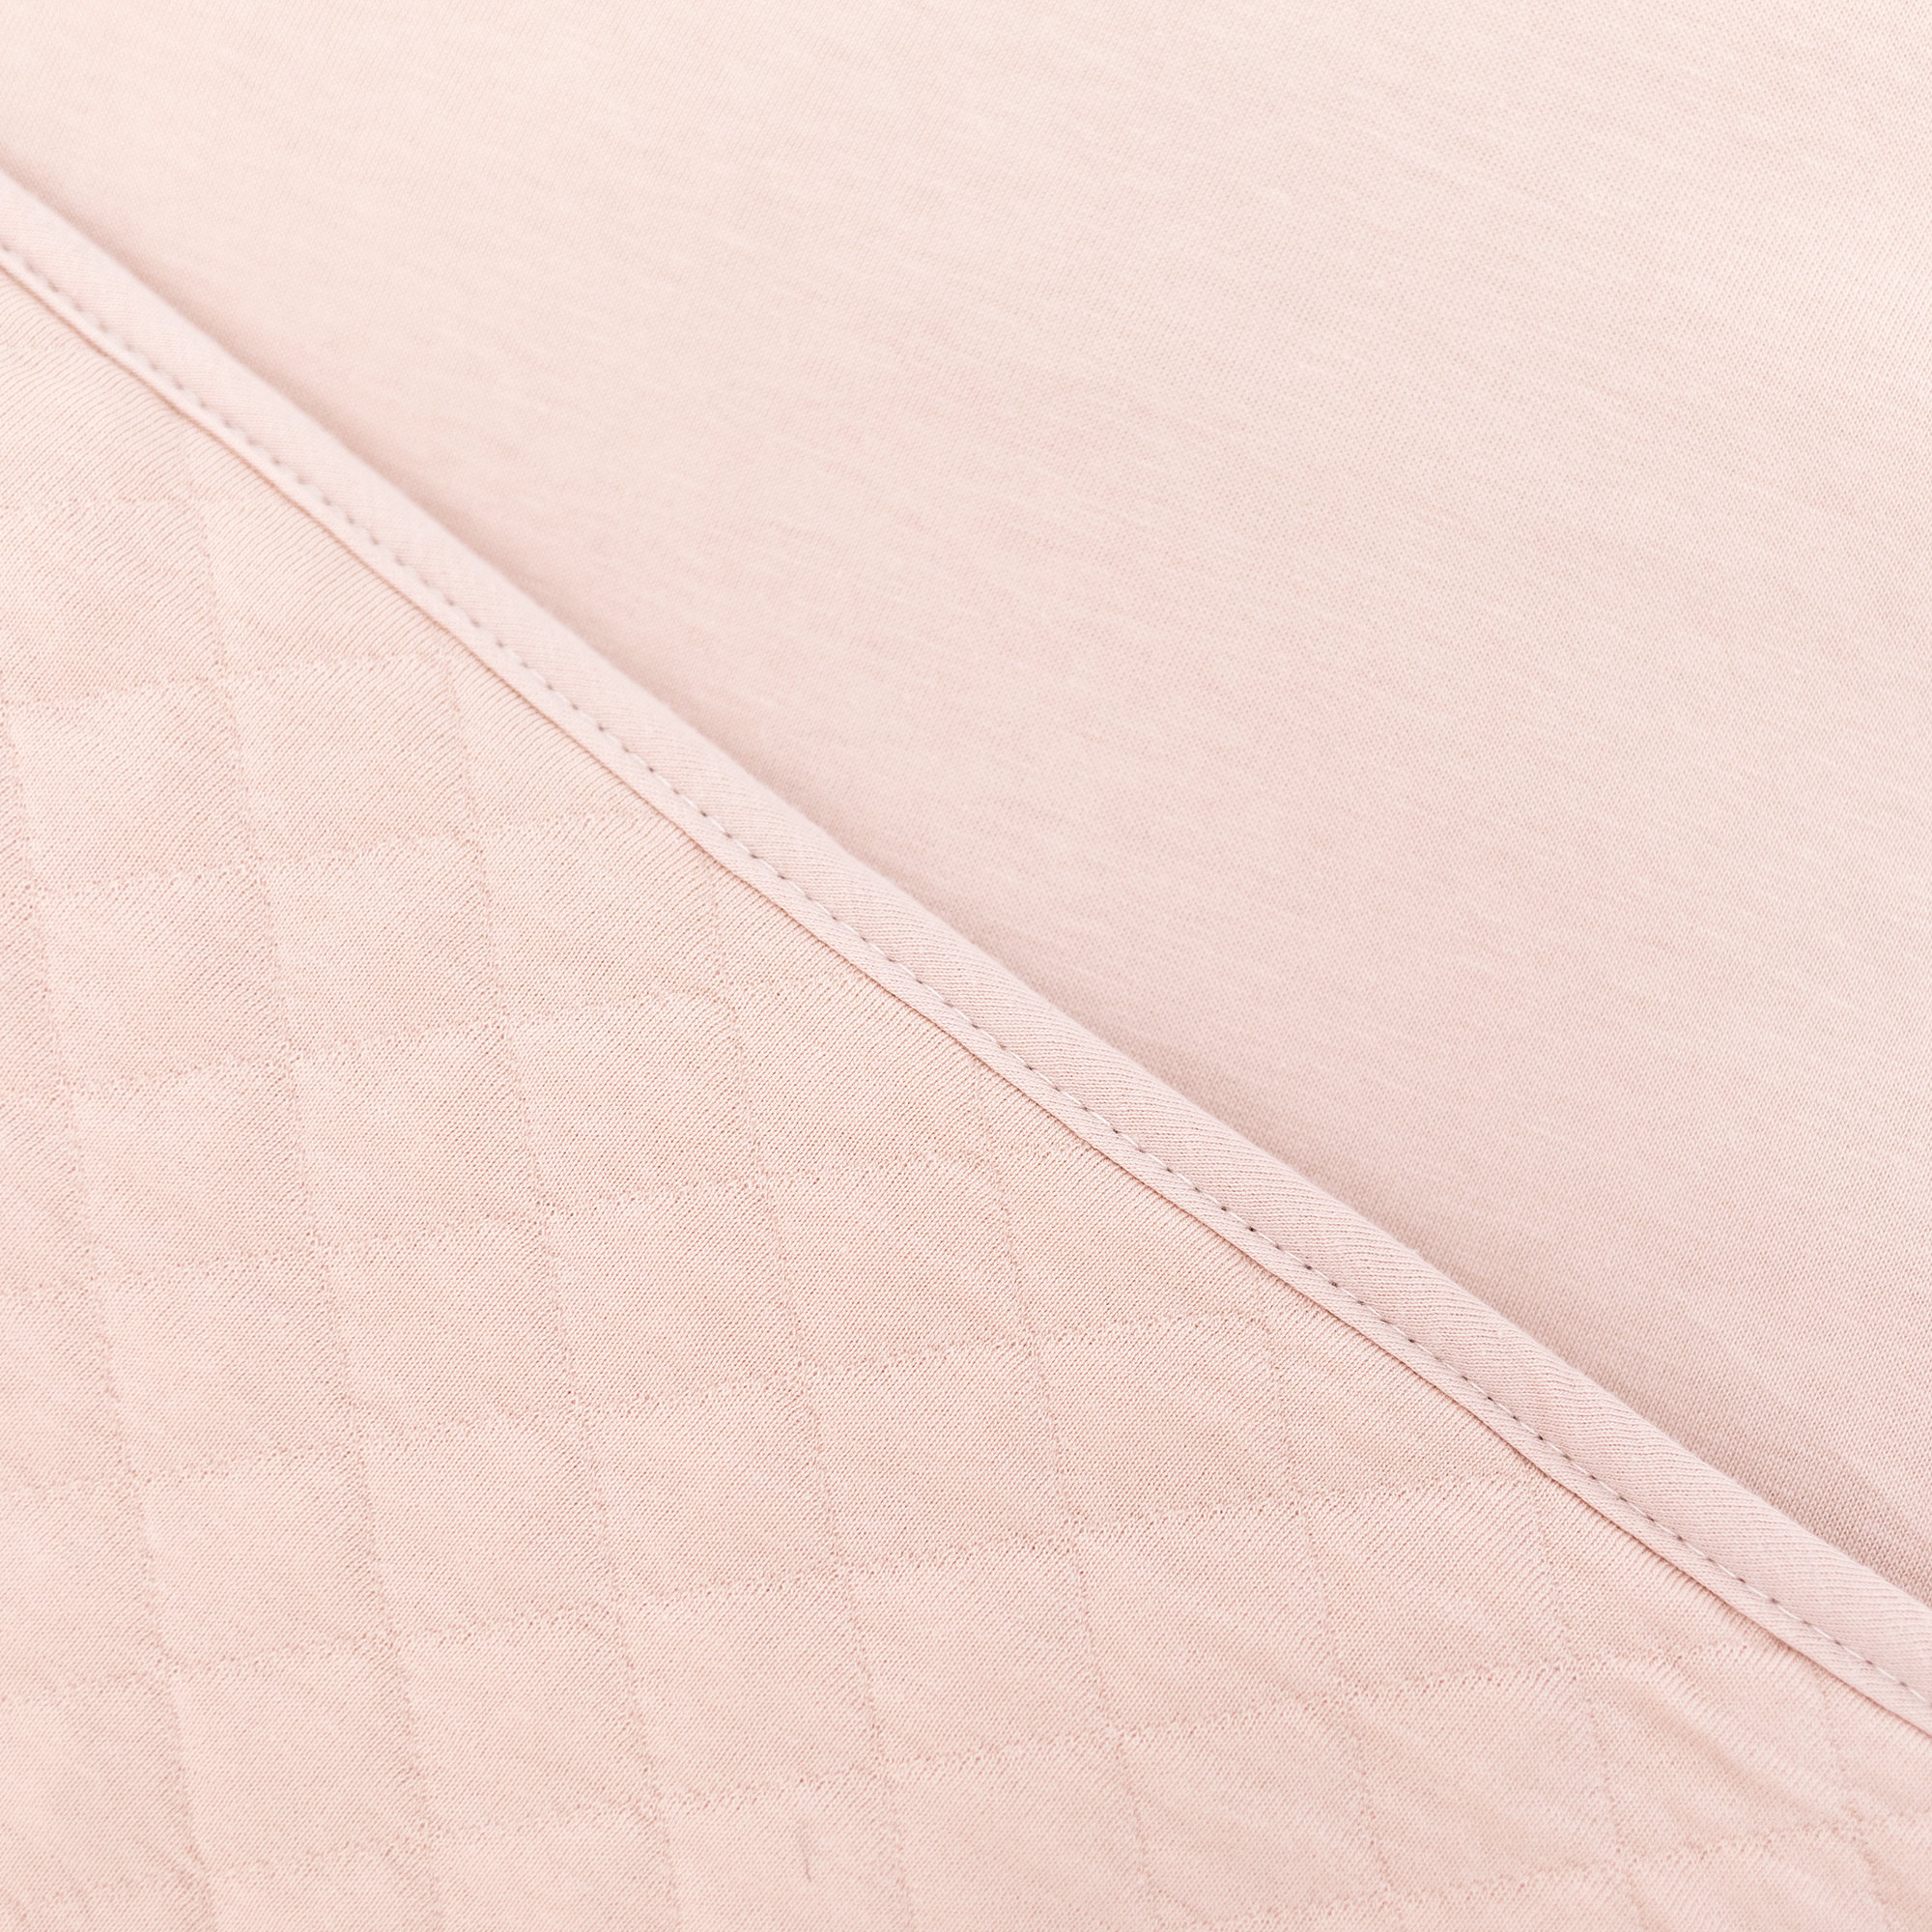 Reisponcho Pady Quilted + jersey 9-36m QUILT Blush